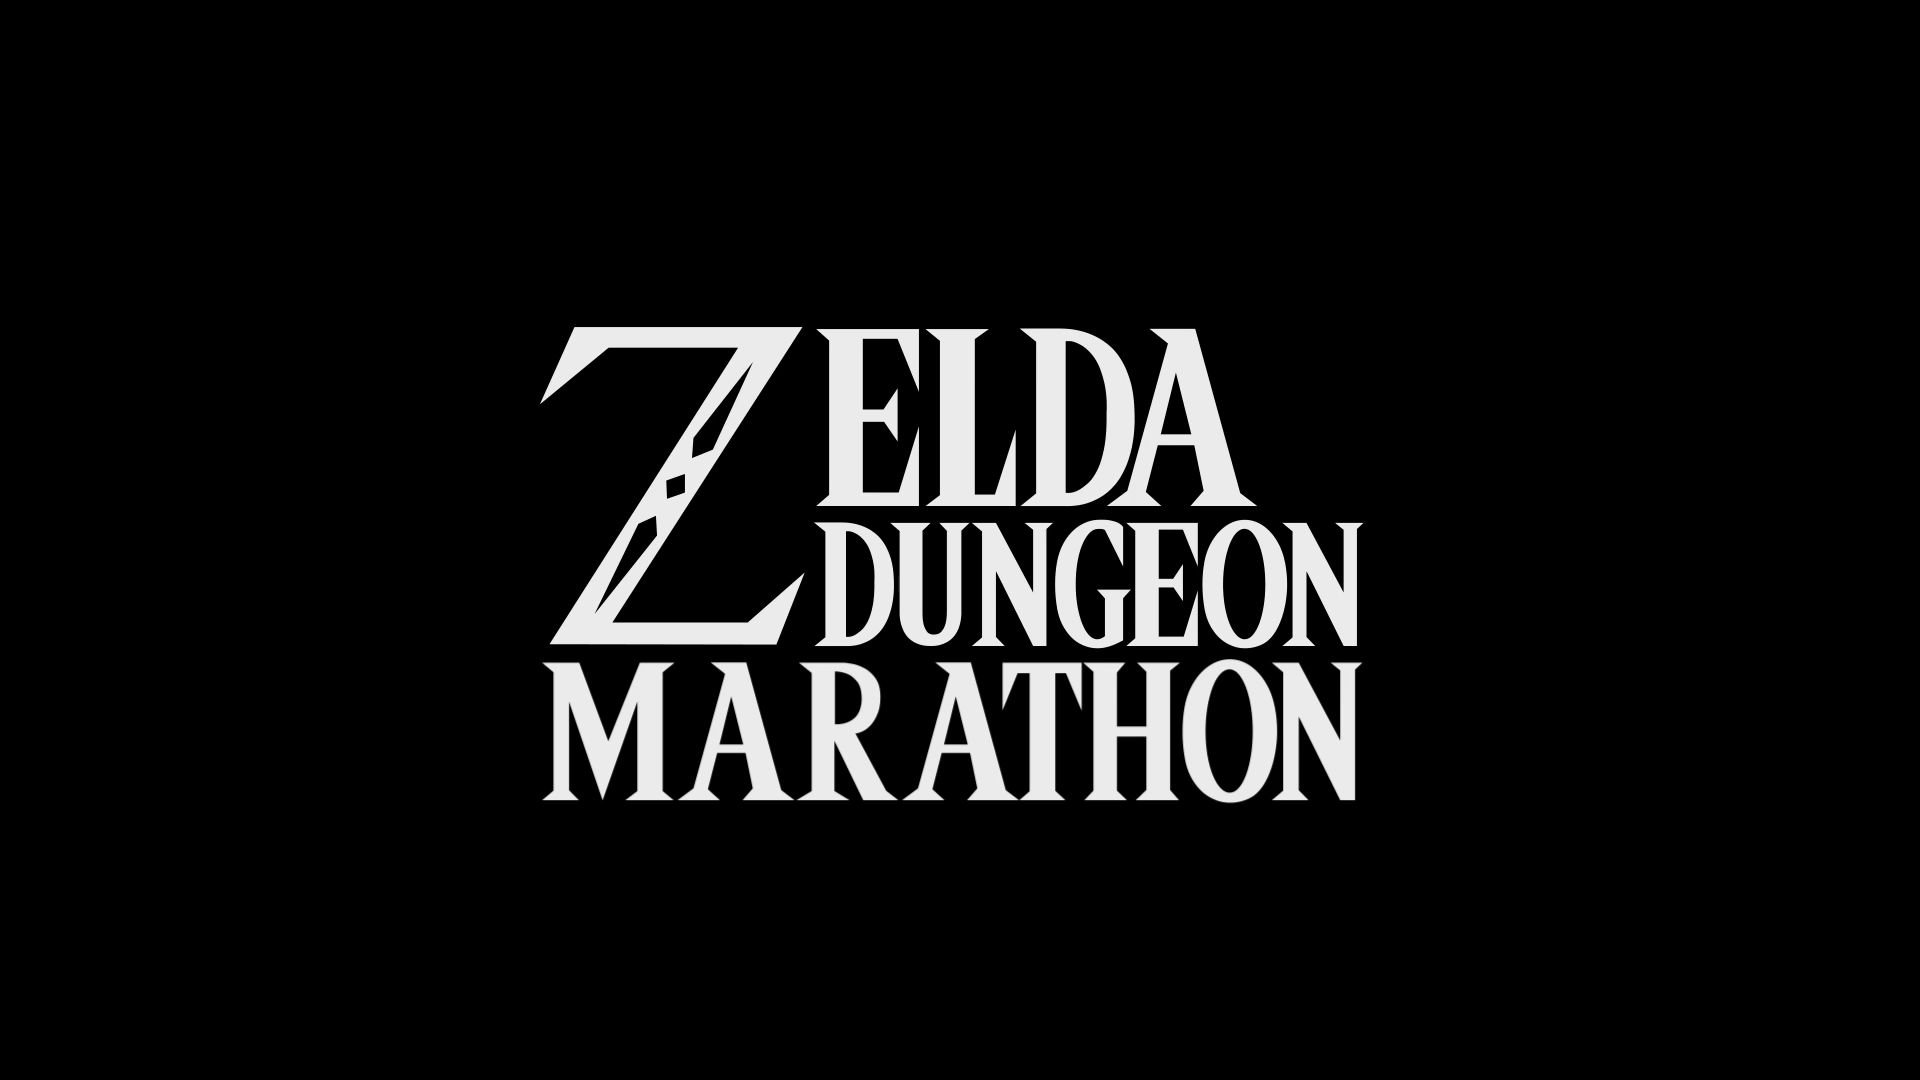 Link (Breath of the Wild) - Zelda Dungeon Wiki, a The Legend of